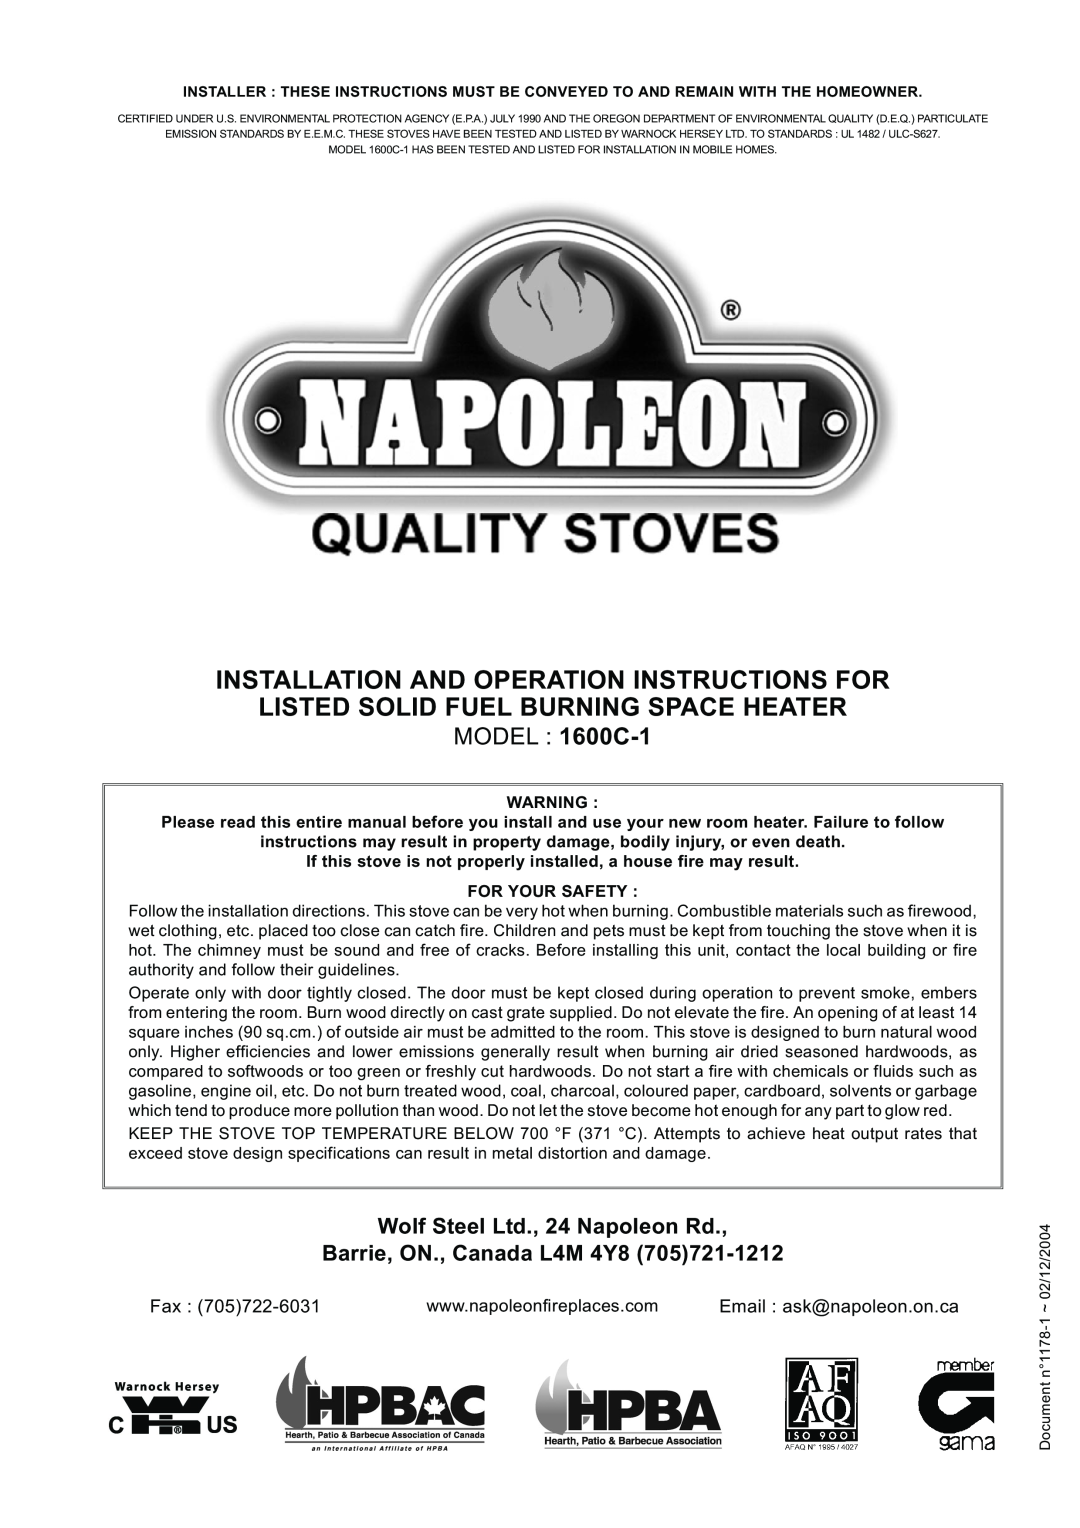 Napoleon Fireplaces specifications Installation And Operation Instructions For, MODEL 1600C-1 